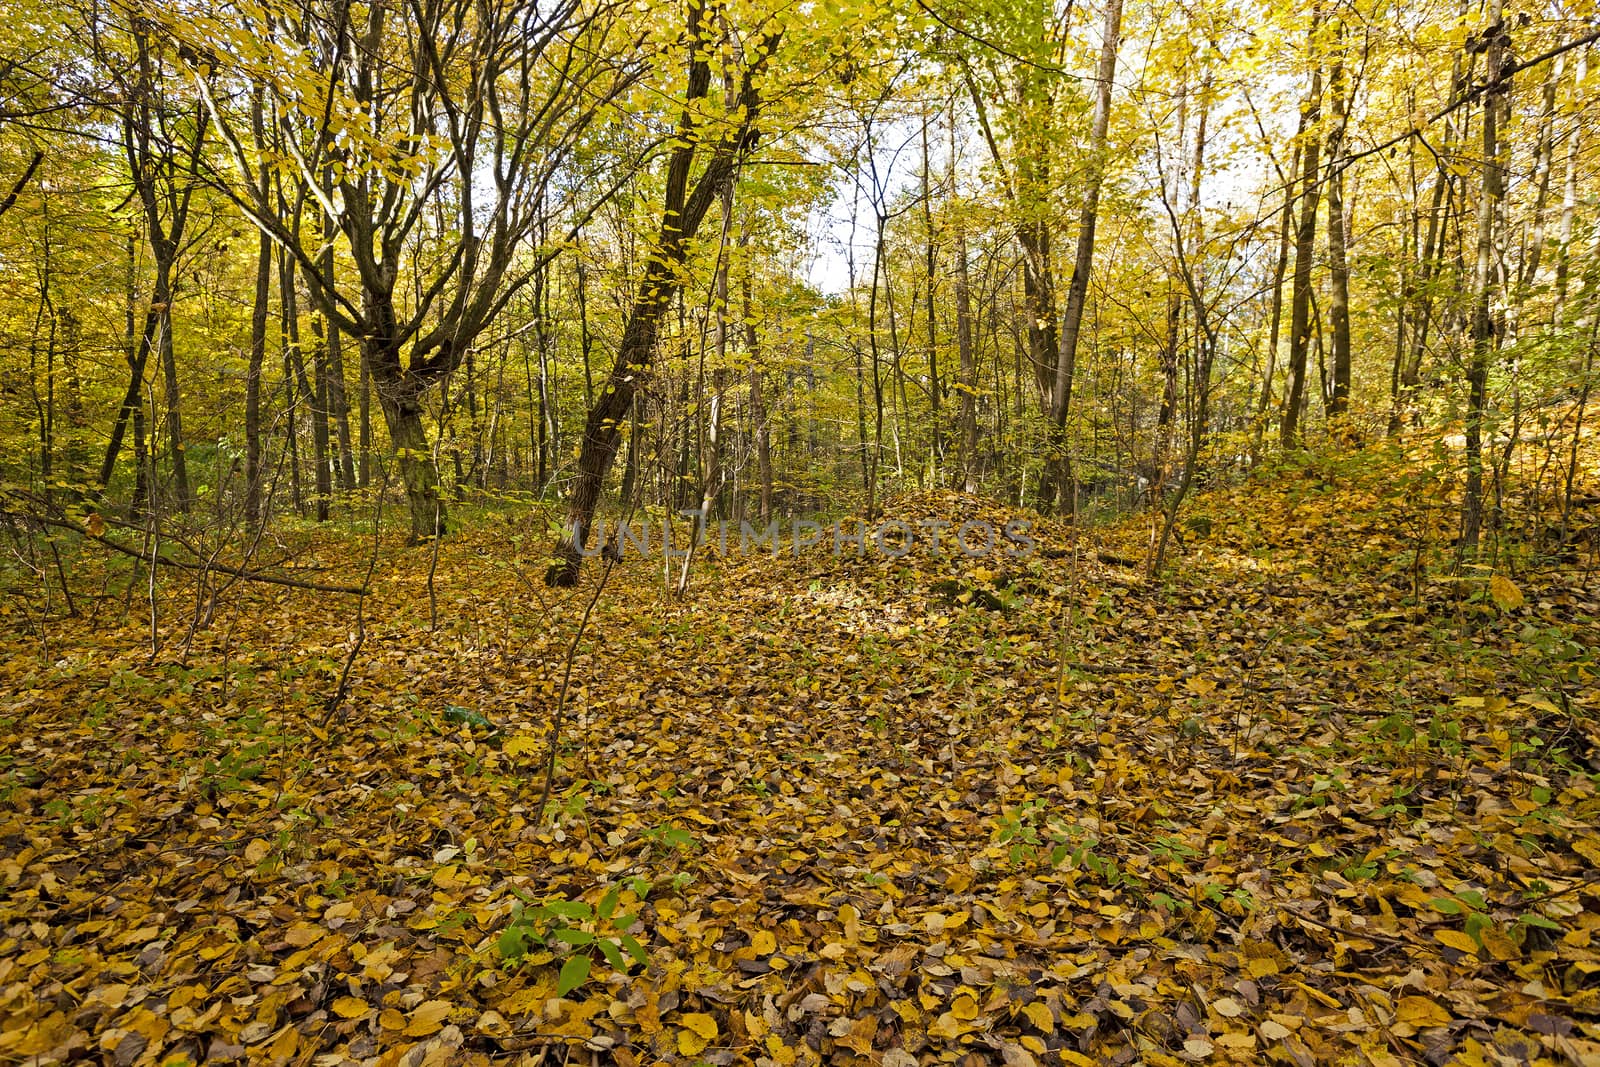   the trees growing in the territory of the wood   in an autumn season